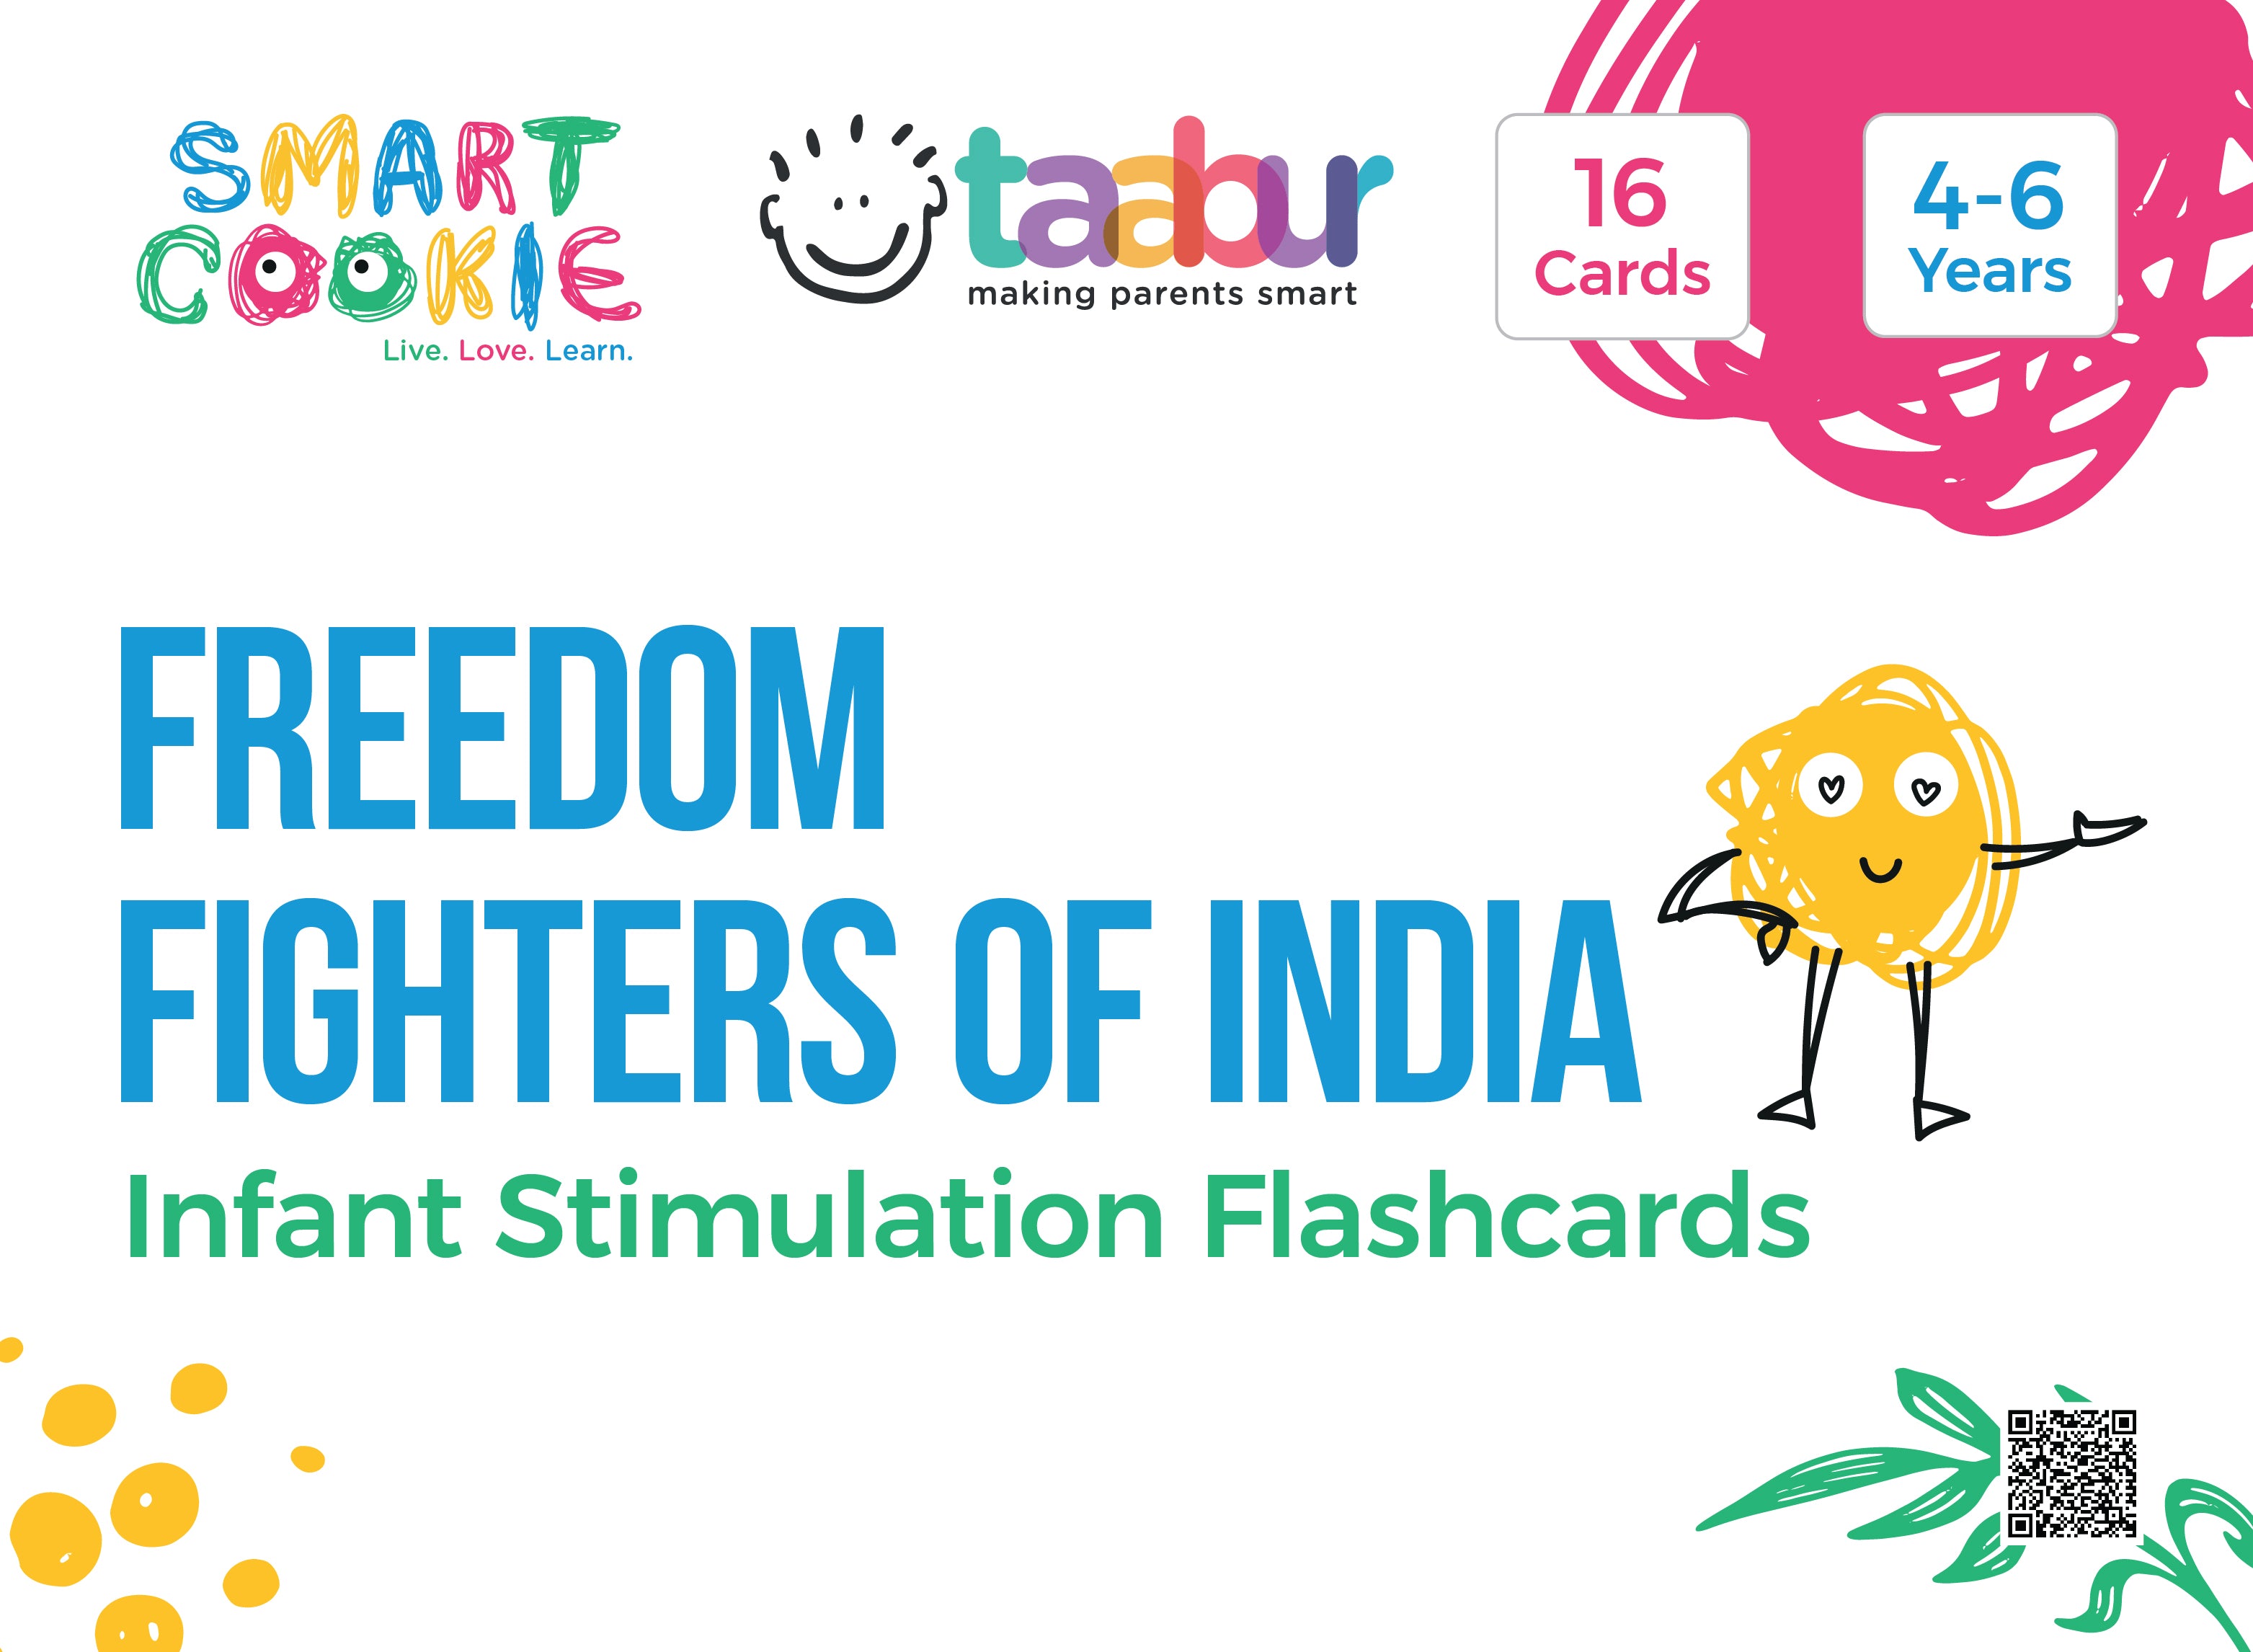 General Knowledge & Awareness- 15 Sets of Interactive Flashcards